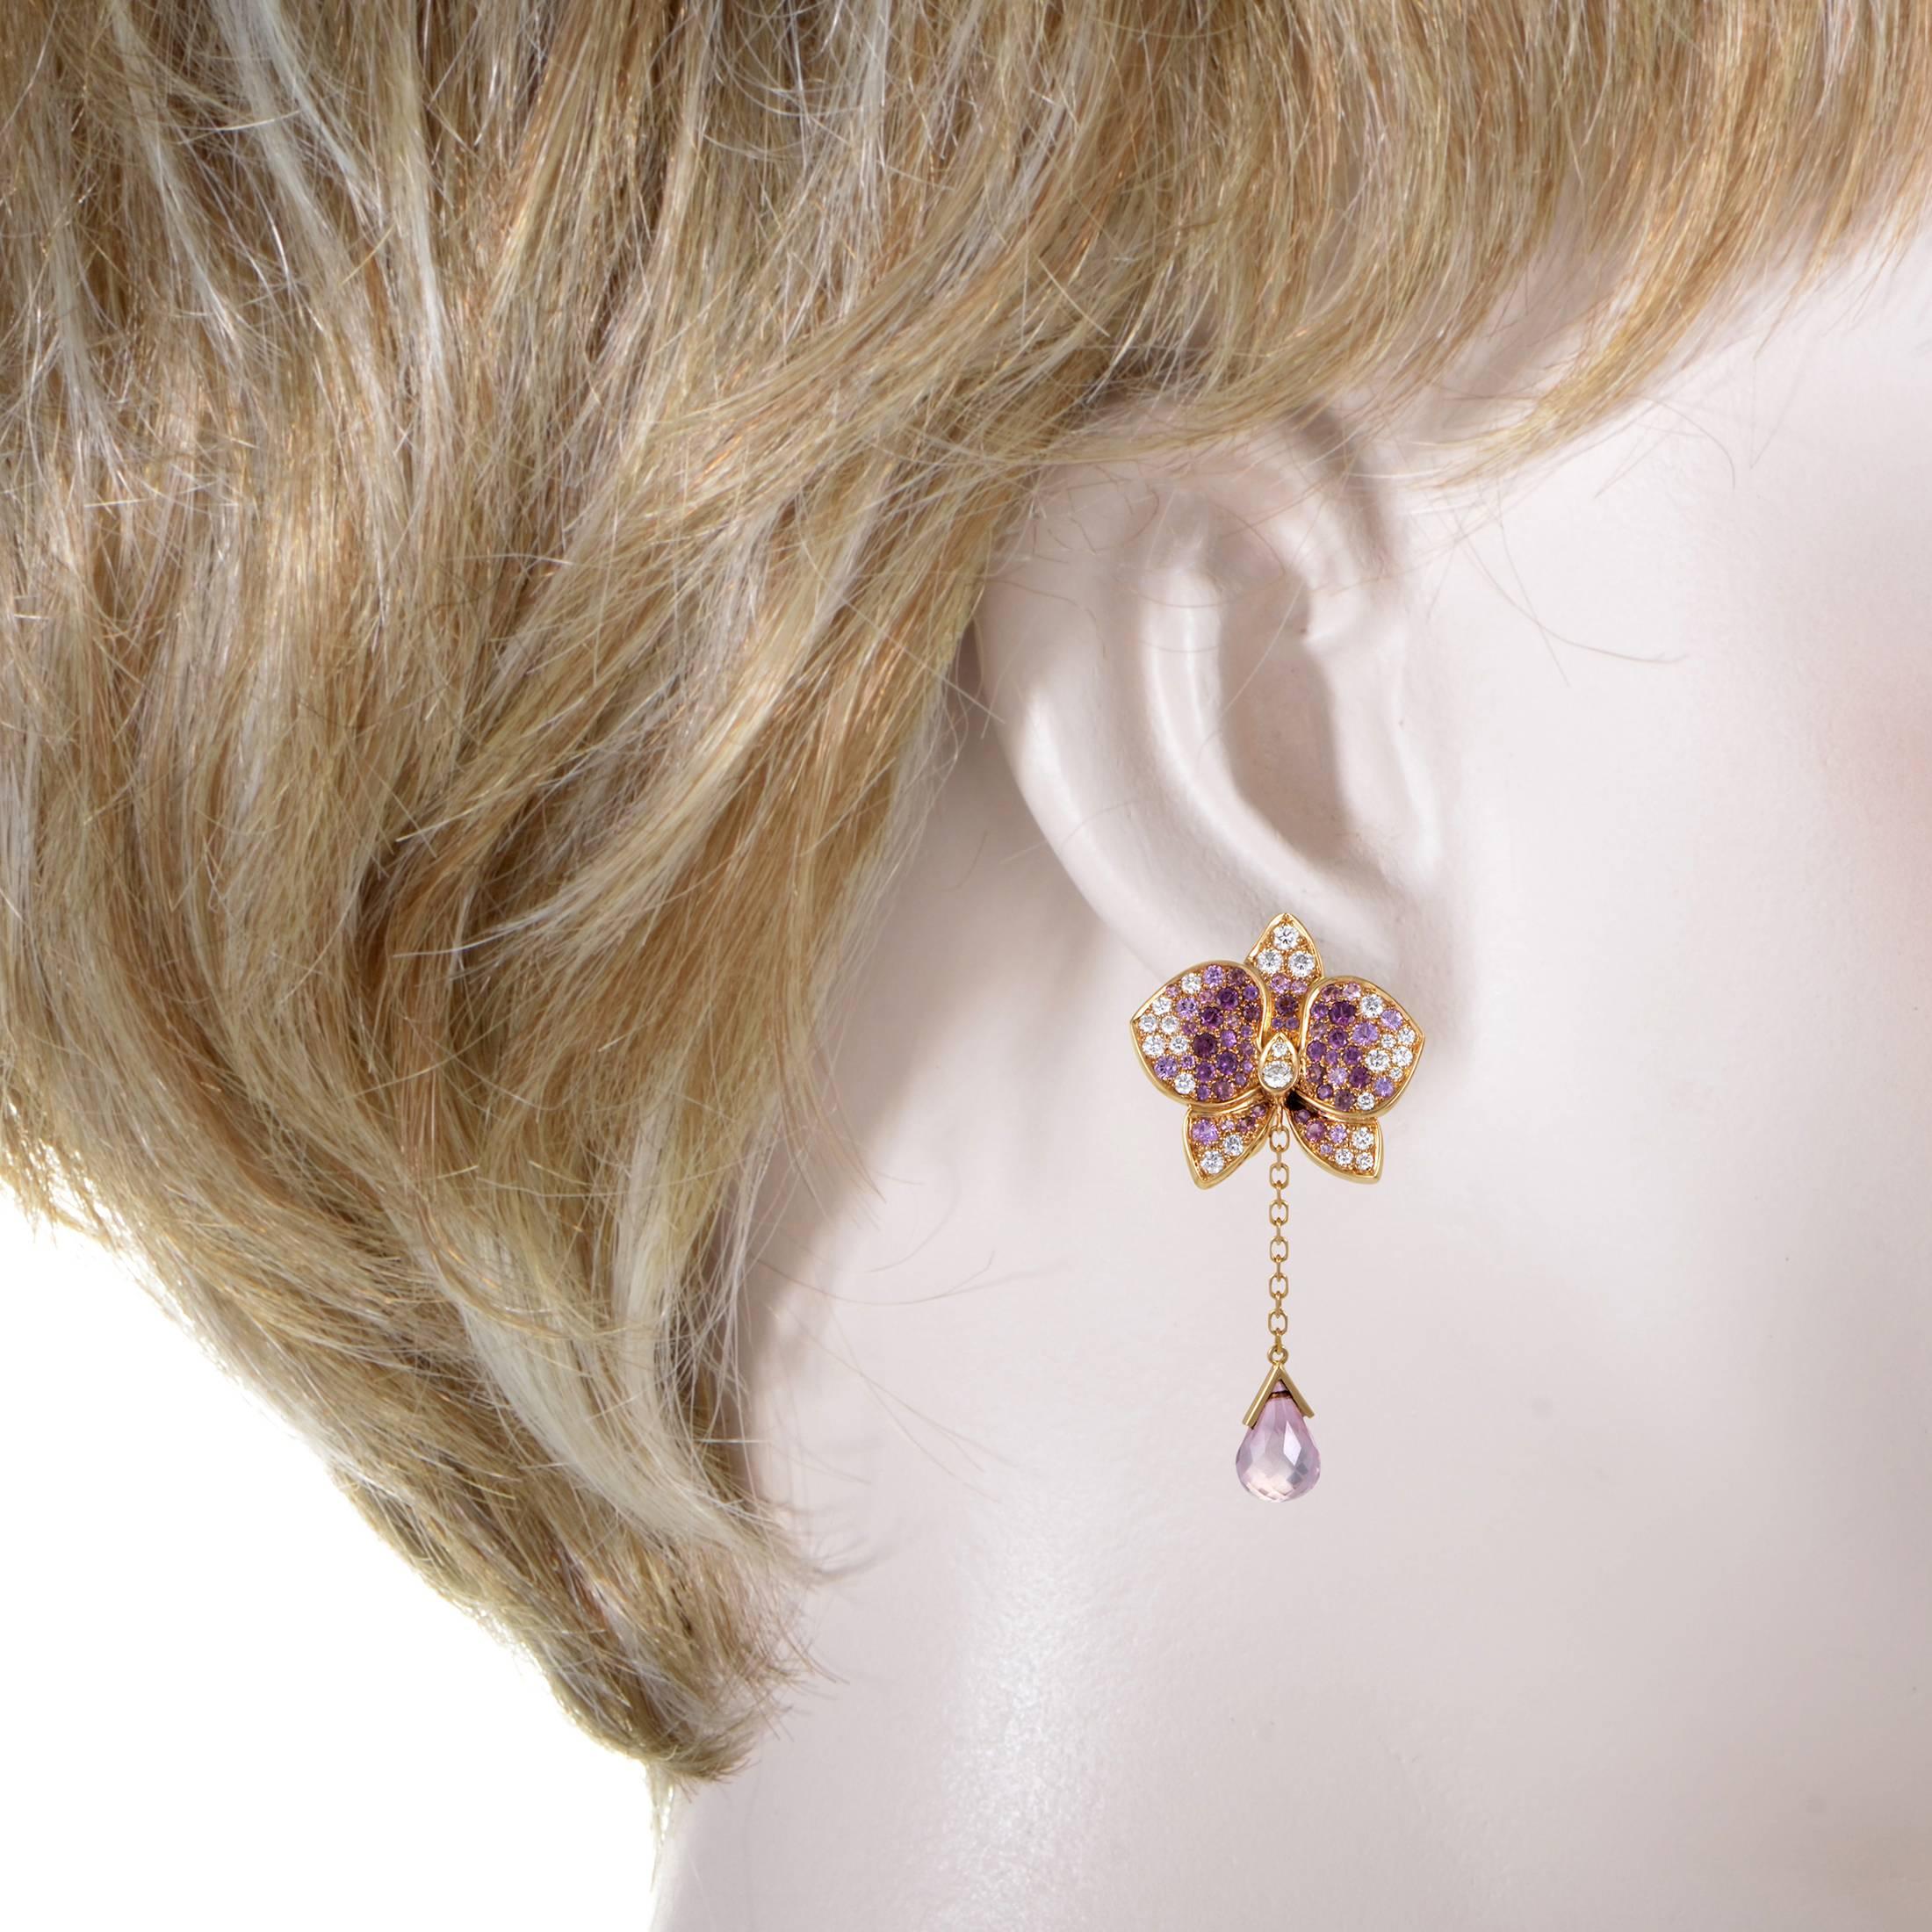 Tender blooms are the hallmark of Cartier's Caresse d'Orchidées collection. This authentic pair of earrings from the collection are made of 18K rose gold and are set with diamonds, pink sapphires, pink tourmaline, and rhodolite garnets. Lastly, a